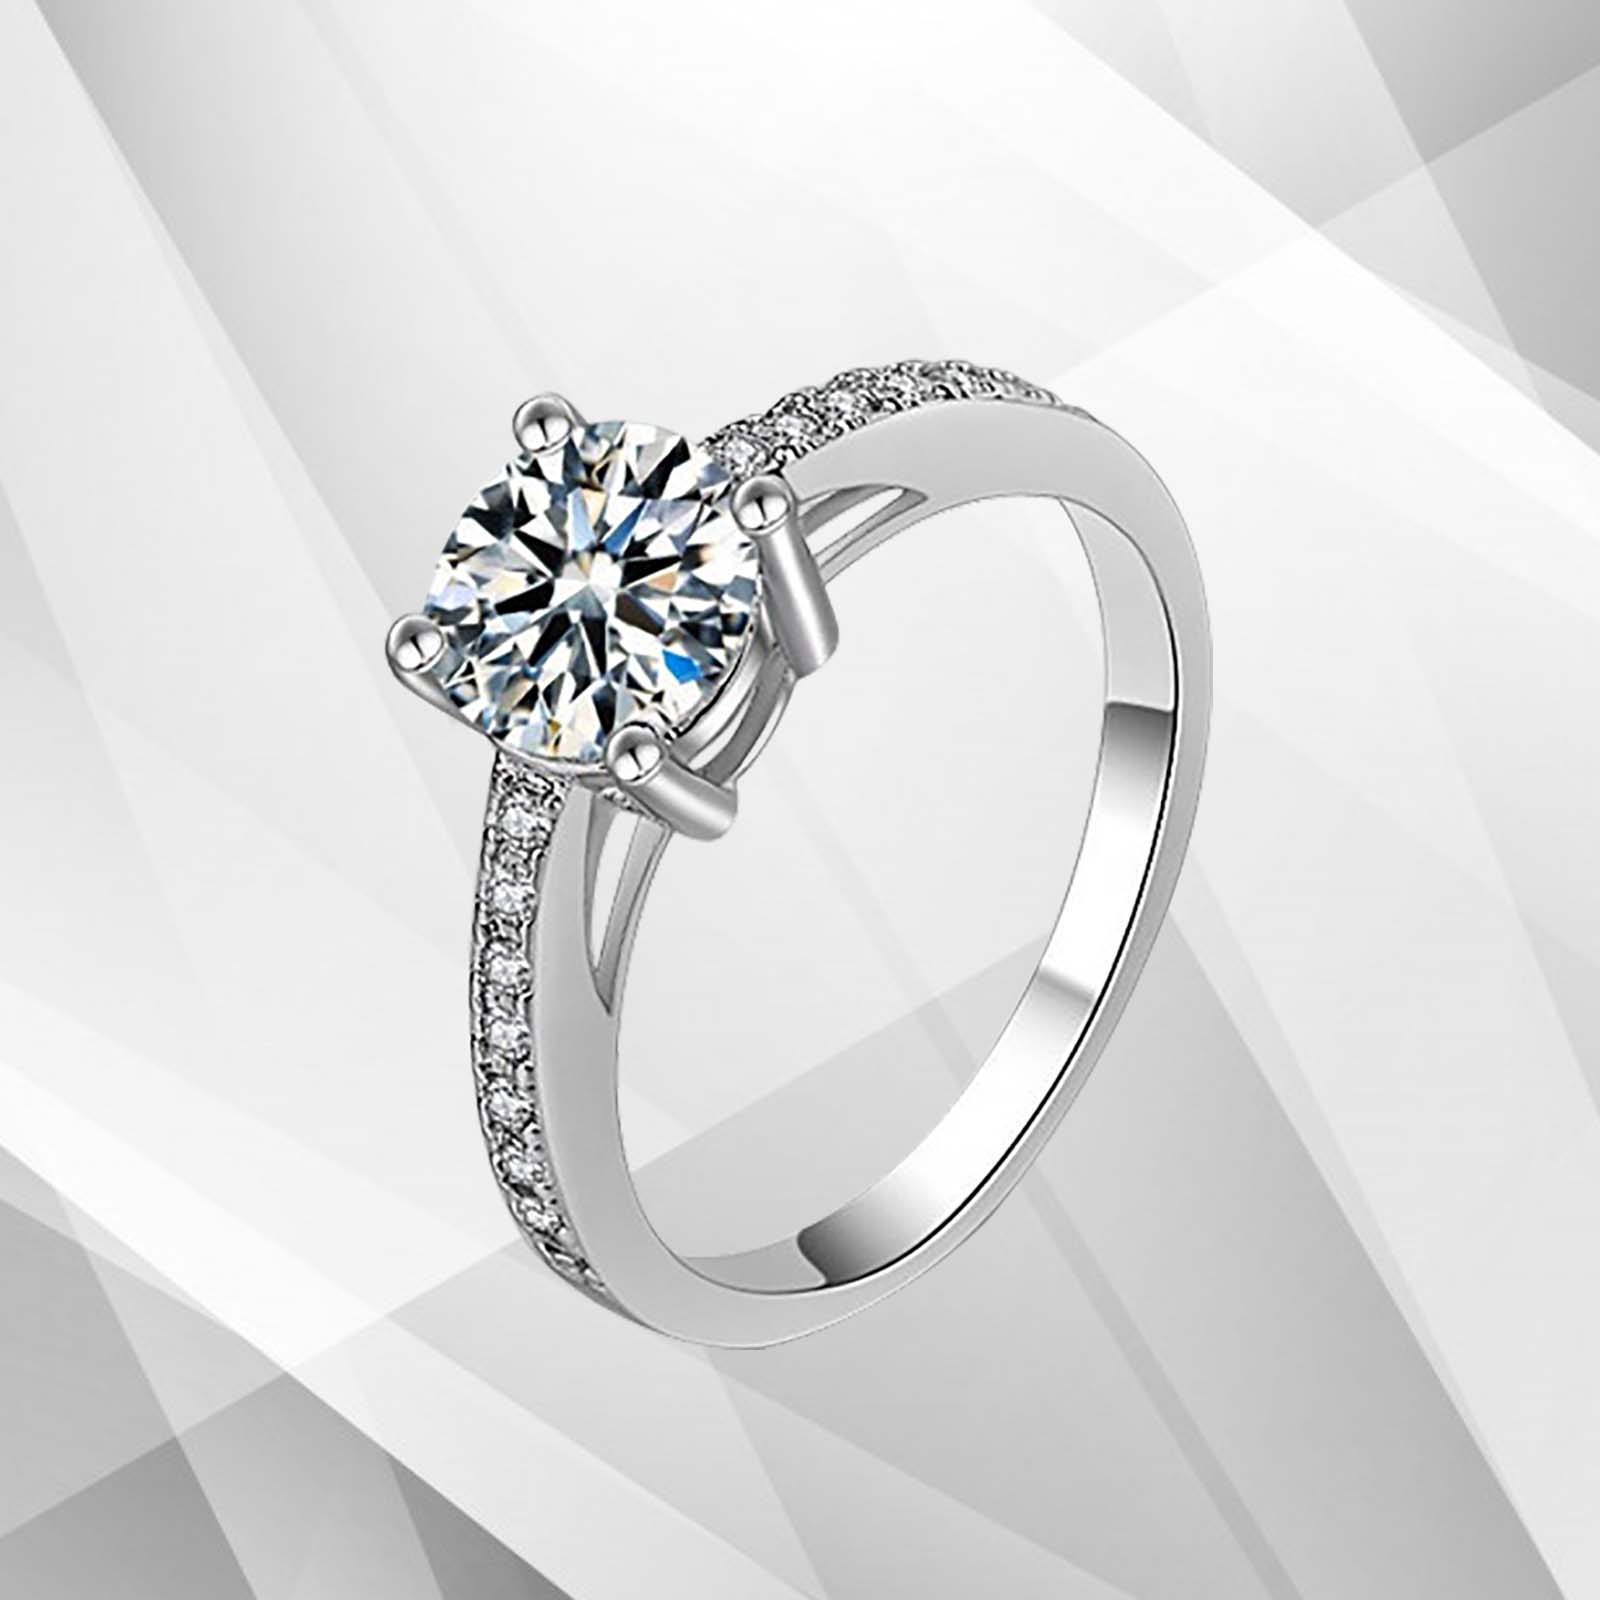 Nature-Inspired Women's Engagement Ring | 2.50Ct CZ Diamond | Prong & Channel Settings - Jewelry & Watches - Bijou Her -  -  - 